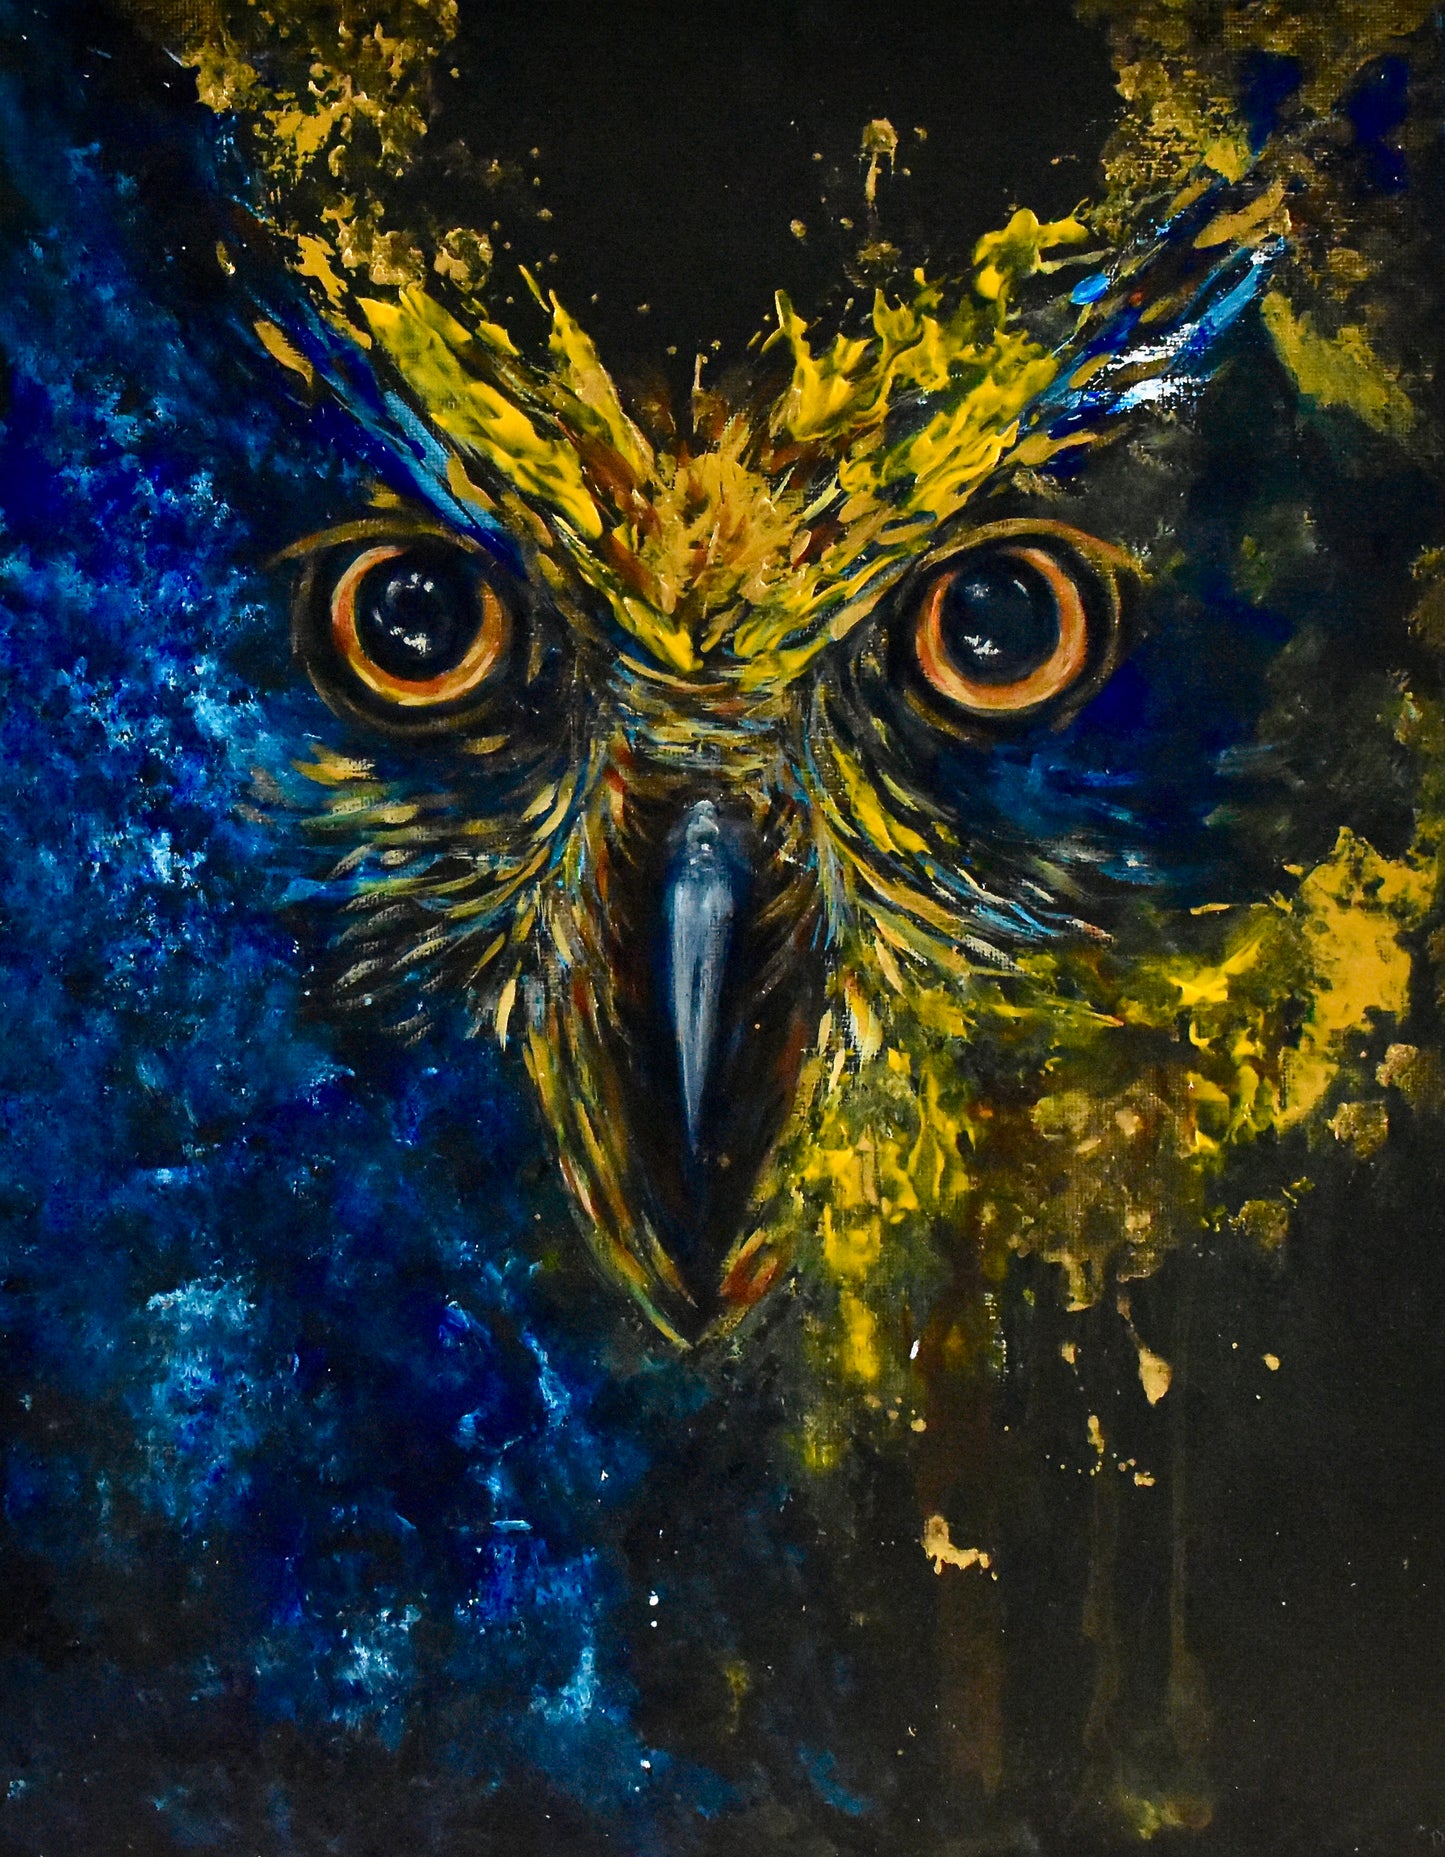 Fly By night ( OWL) in Blue on Black